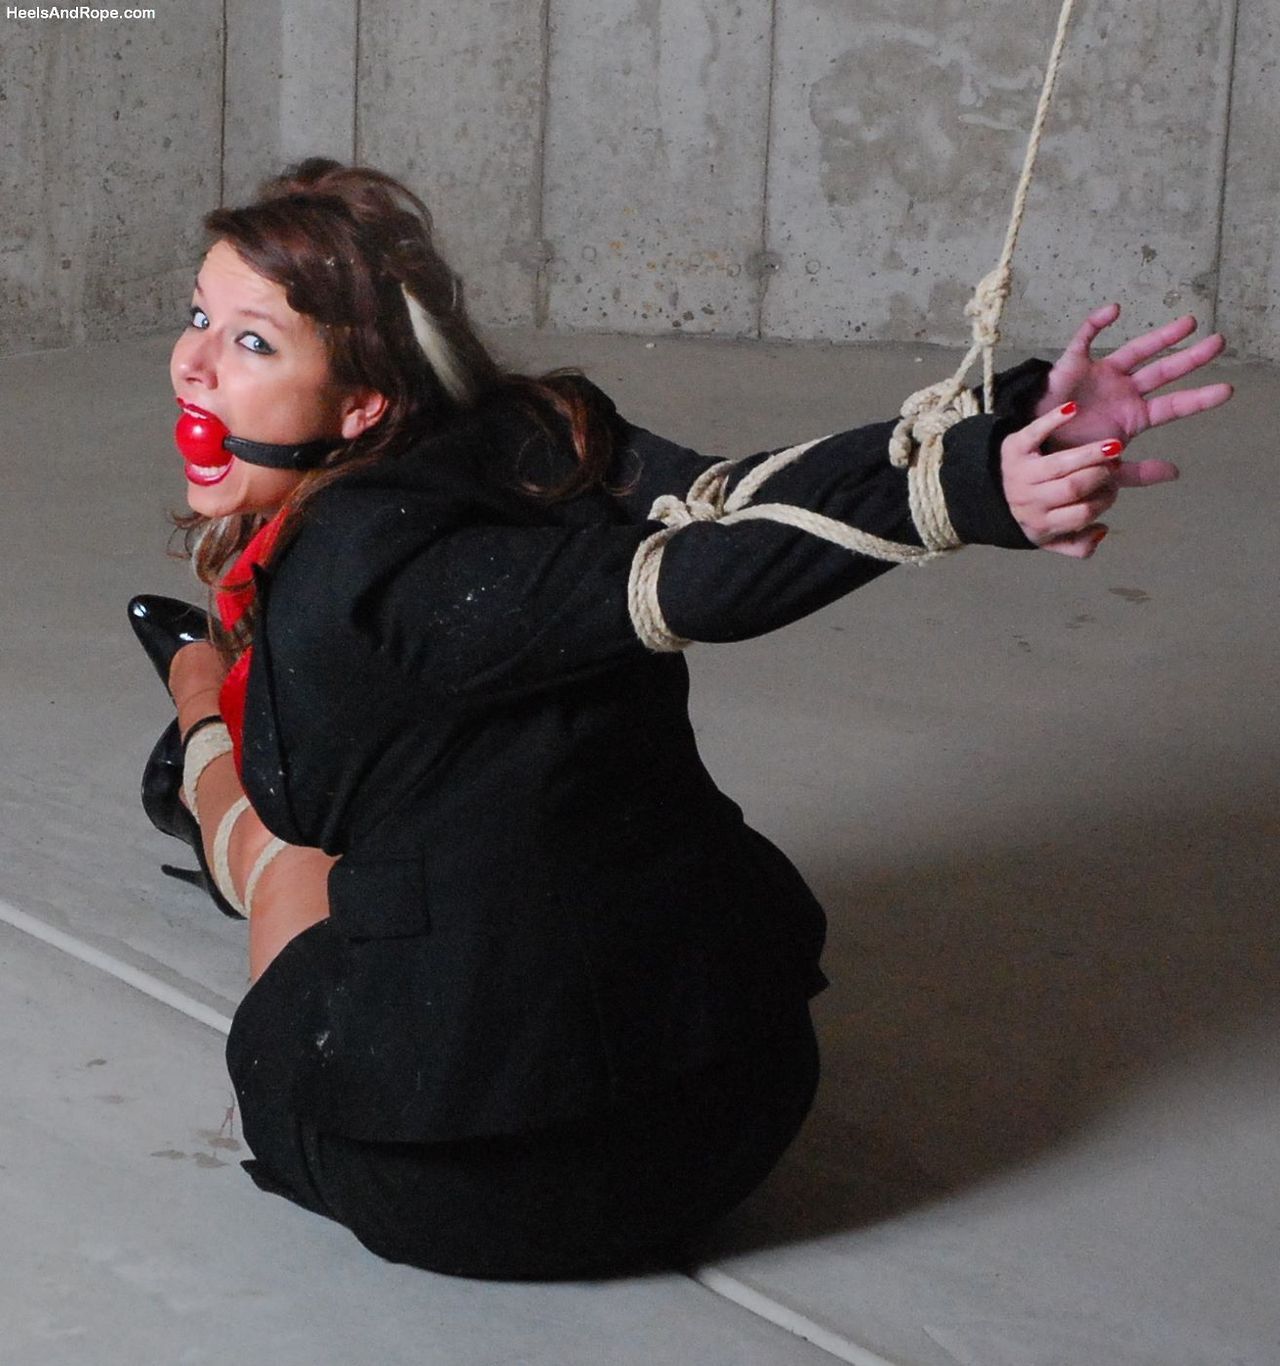  Heels And Rope 175-JJ Plush (Part 9)  